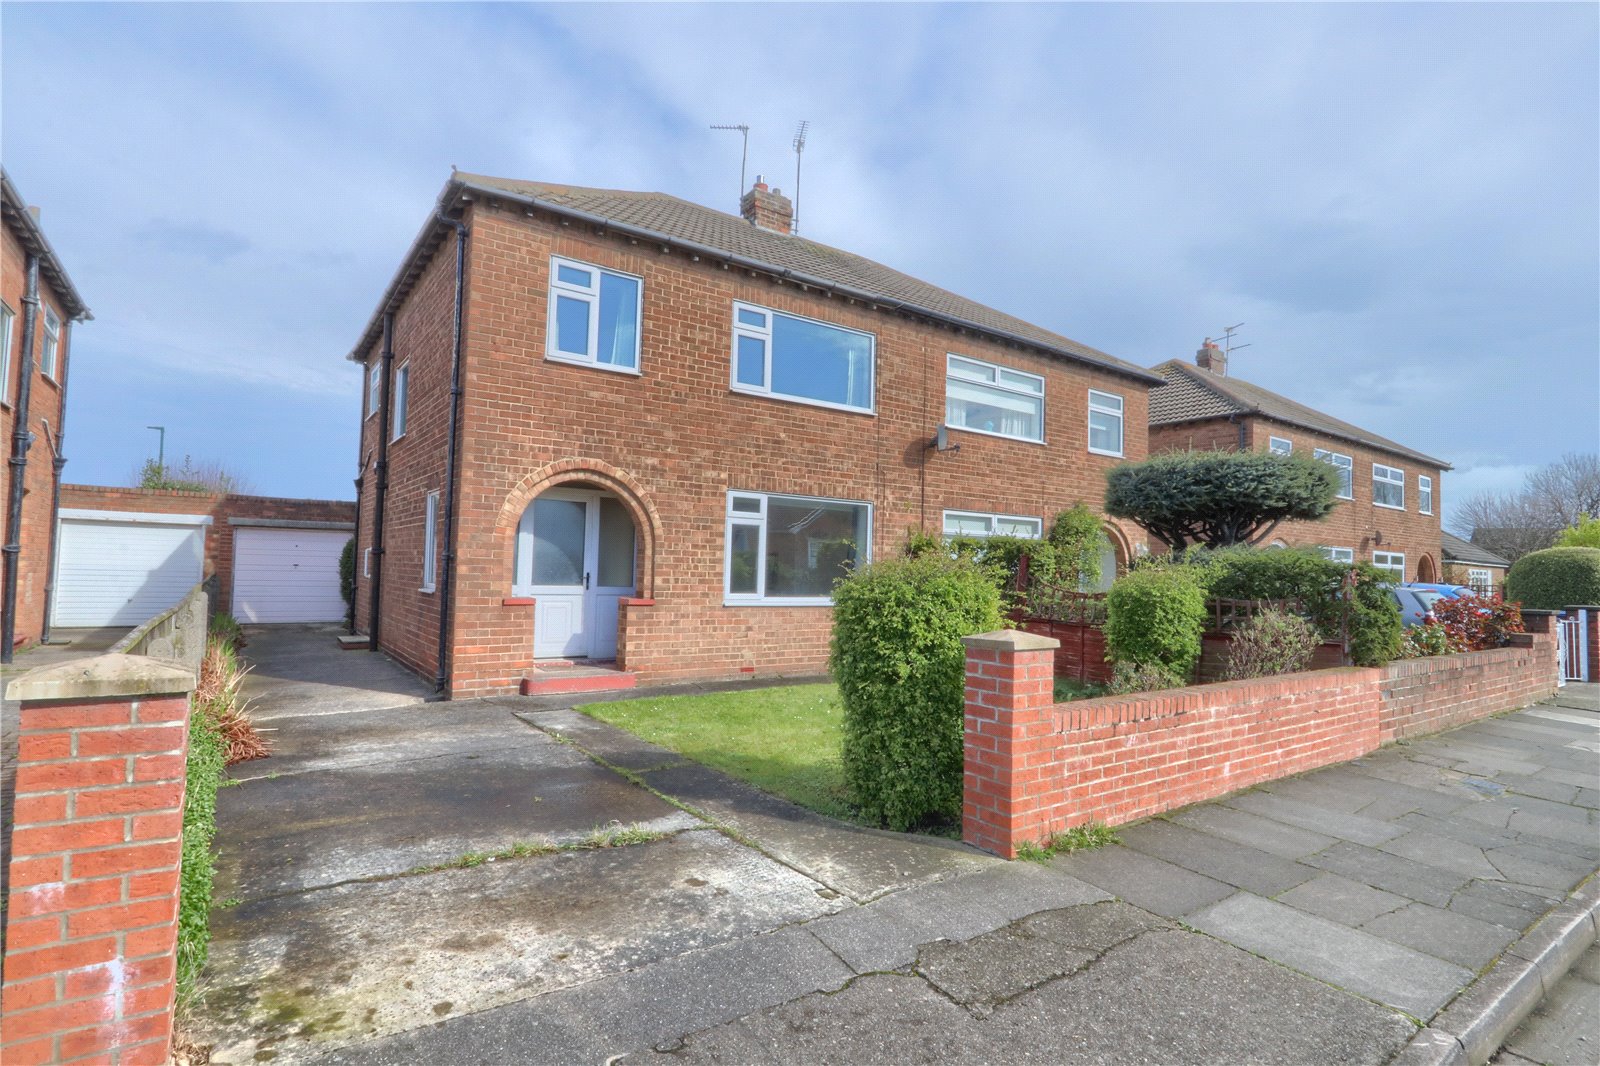 3 bed house for sale in Goodwood Road, Redcar - Property Image 1